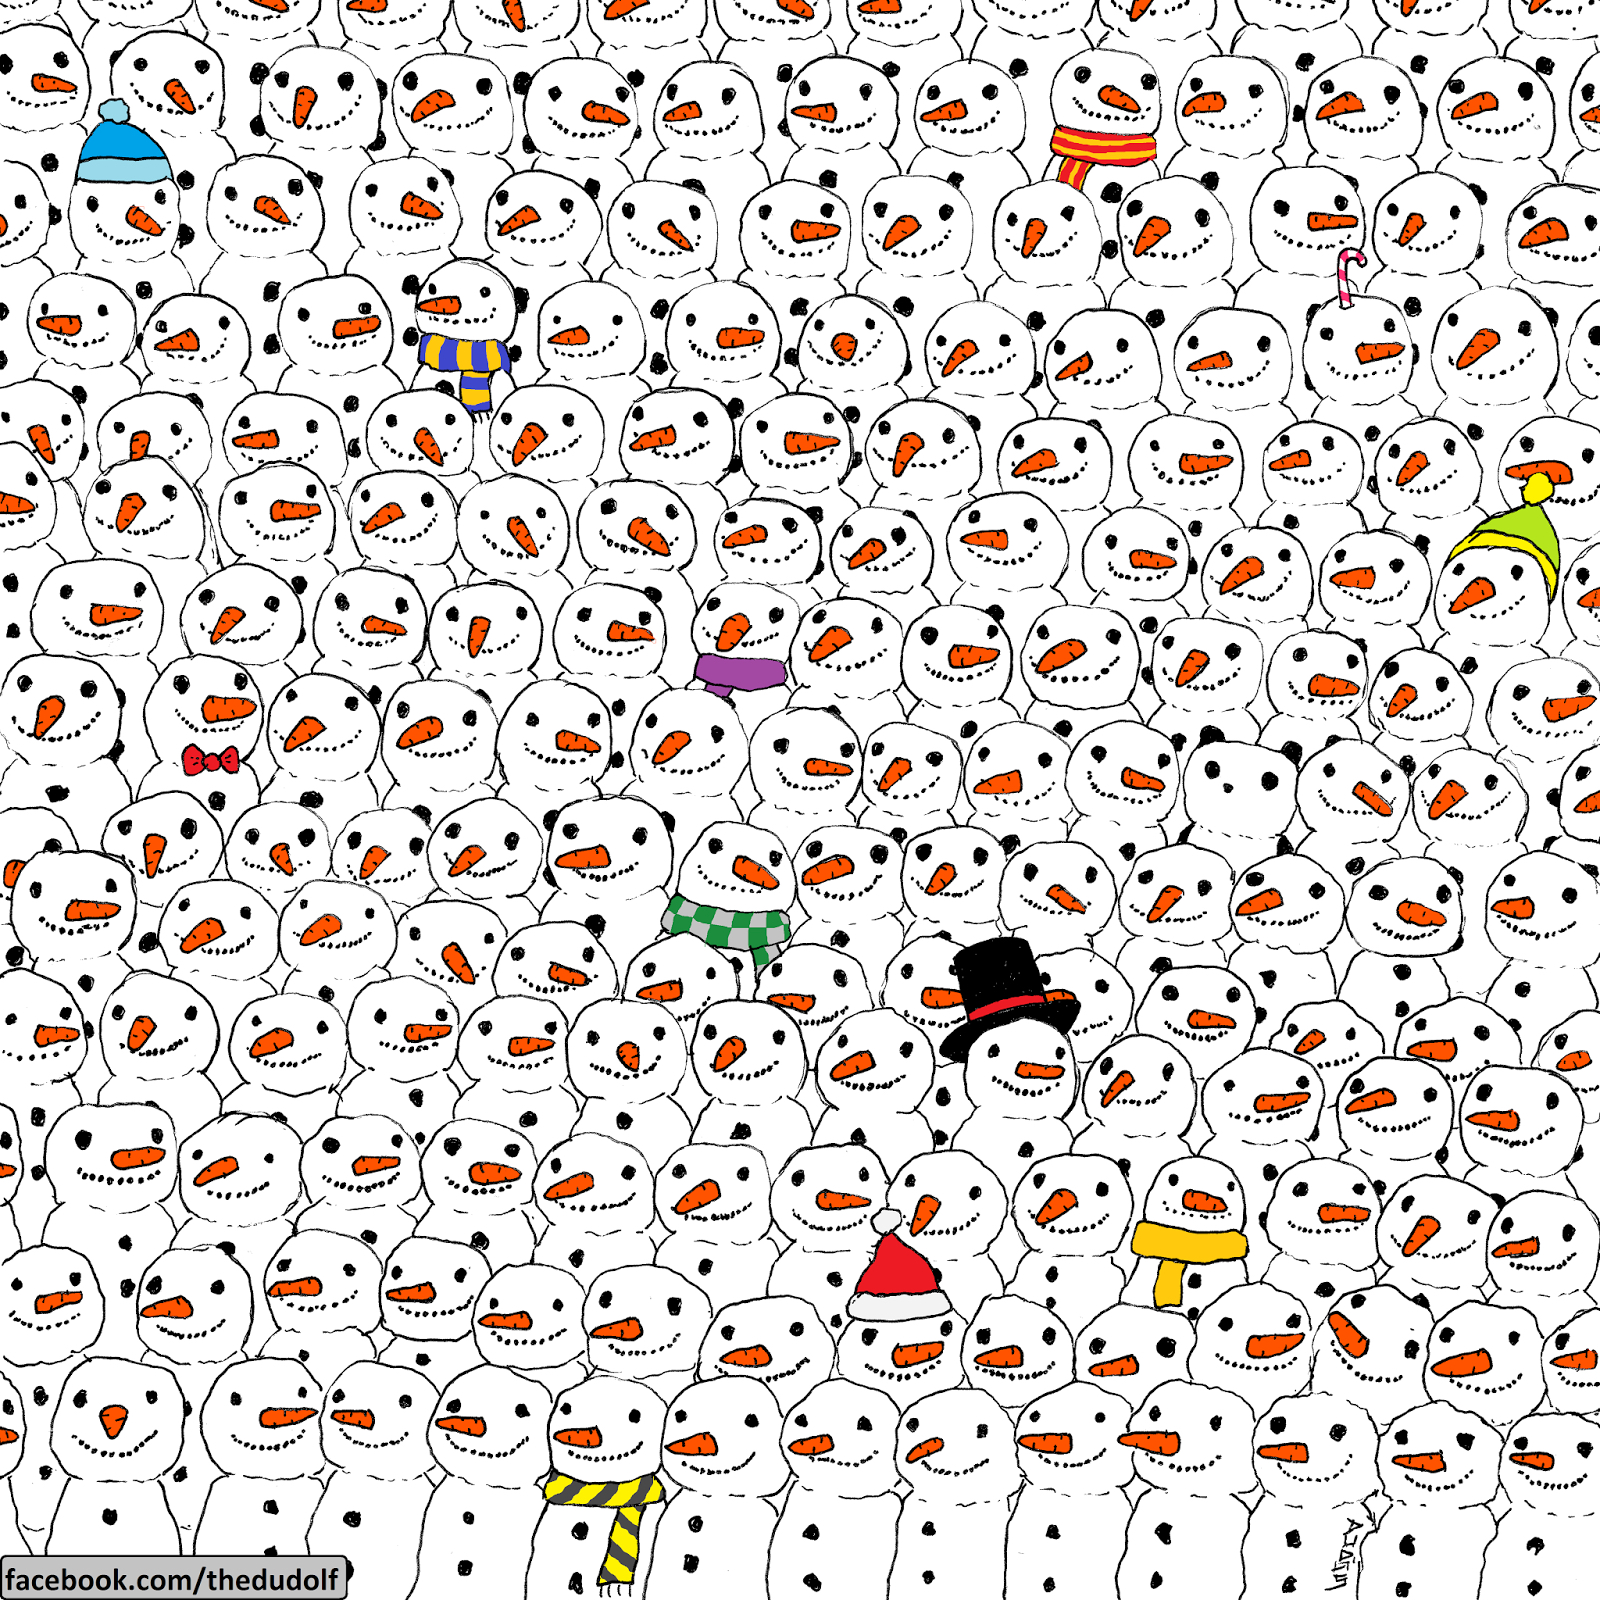 The Internet is Going Crazy Looking for the Panda in This Photo